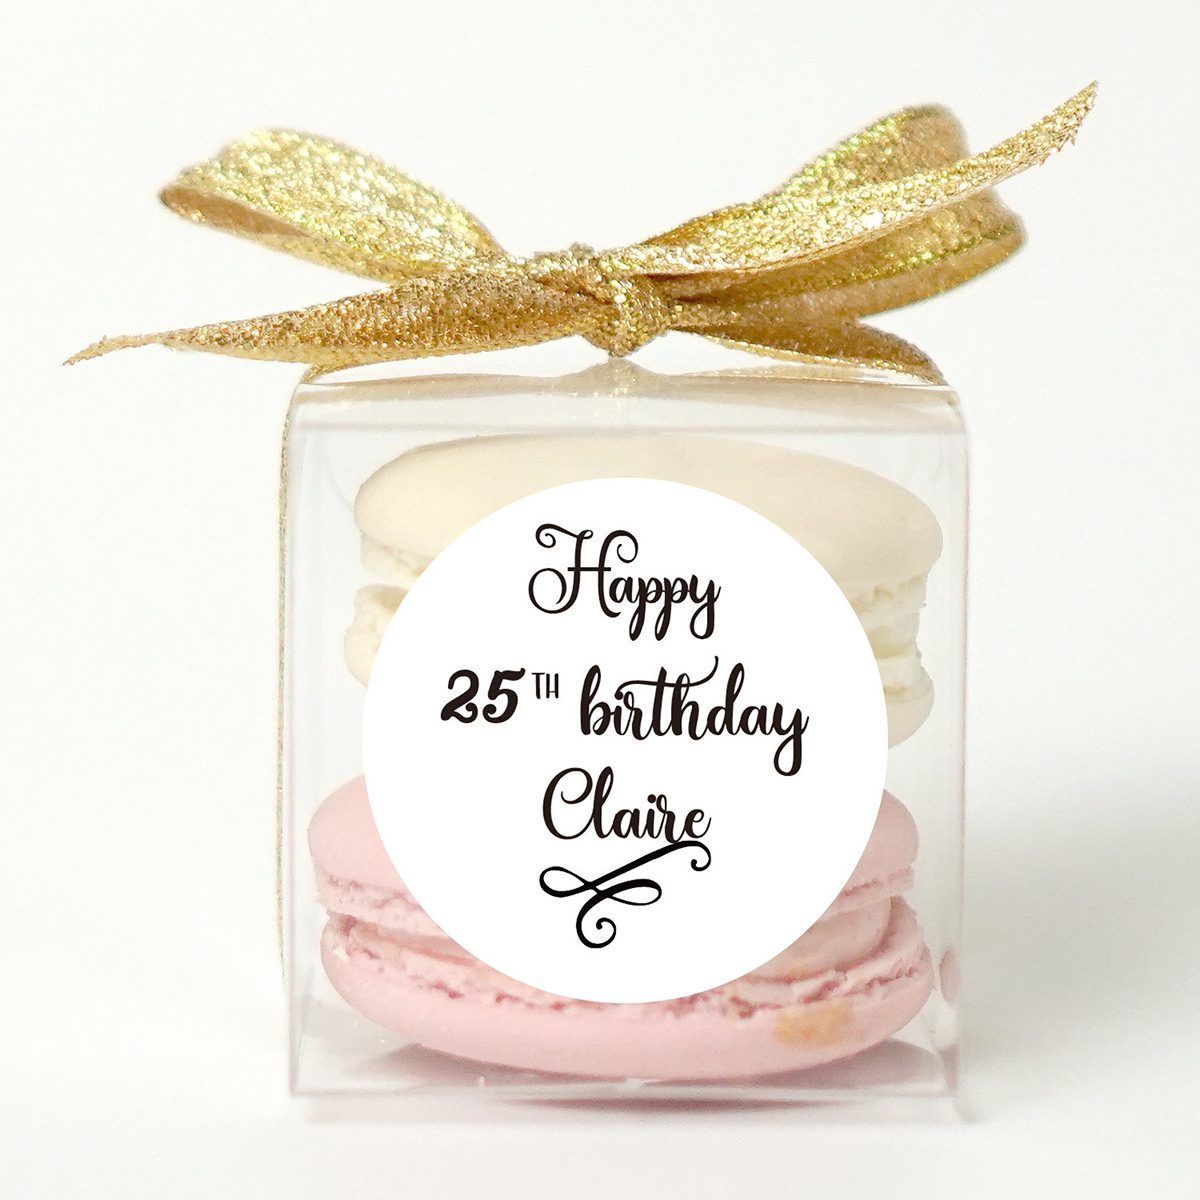 10 Easy DIY Adult Birthday Party Favors for Women – Birthday Butler